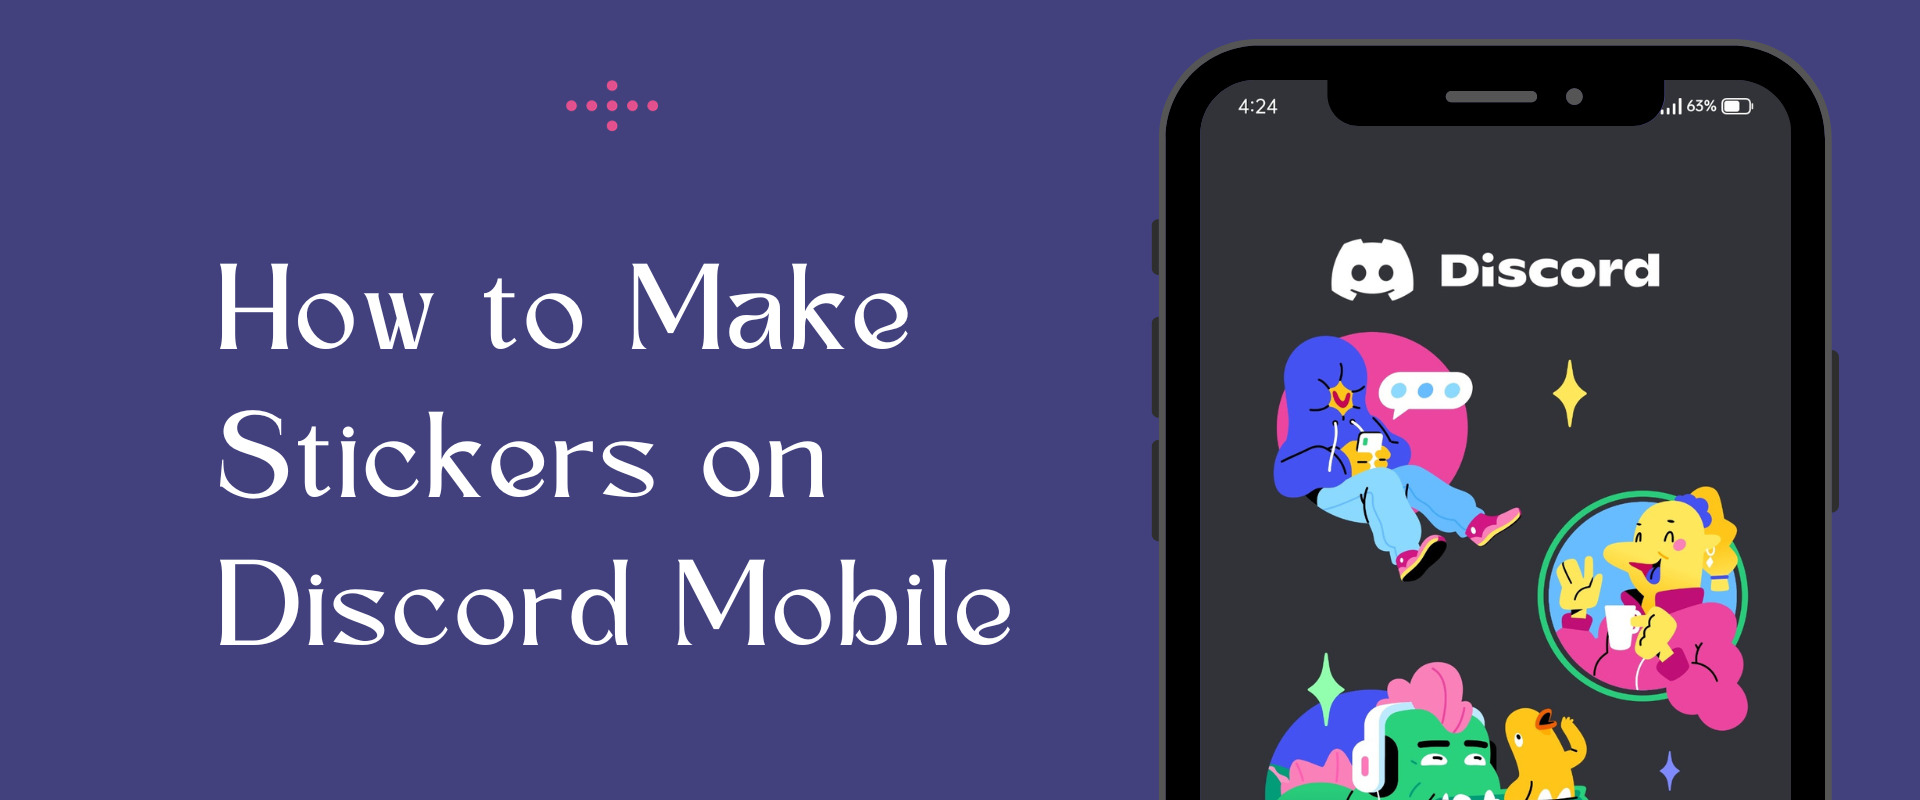 How to Make Stickers on Discord Mobile (Quick Guide)